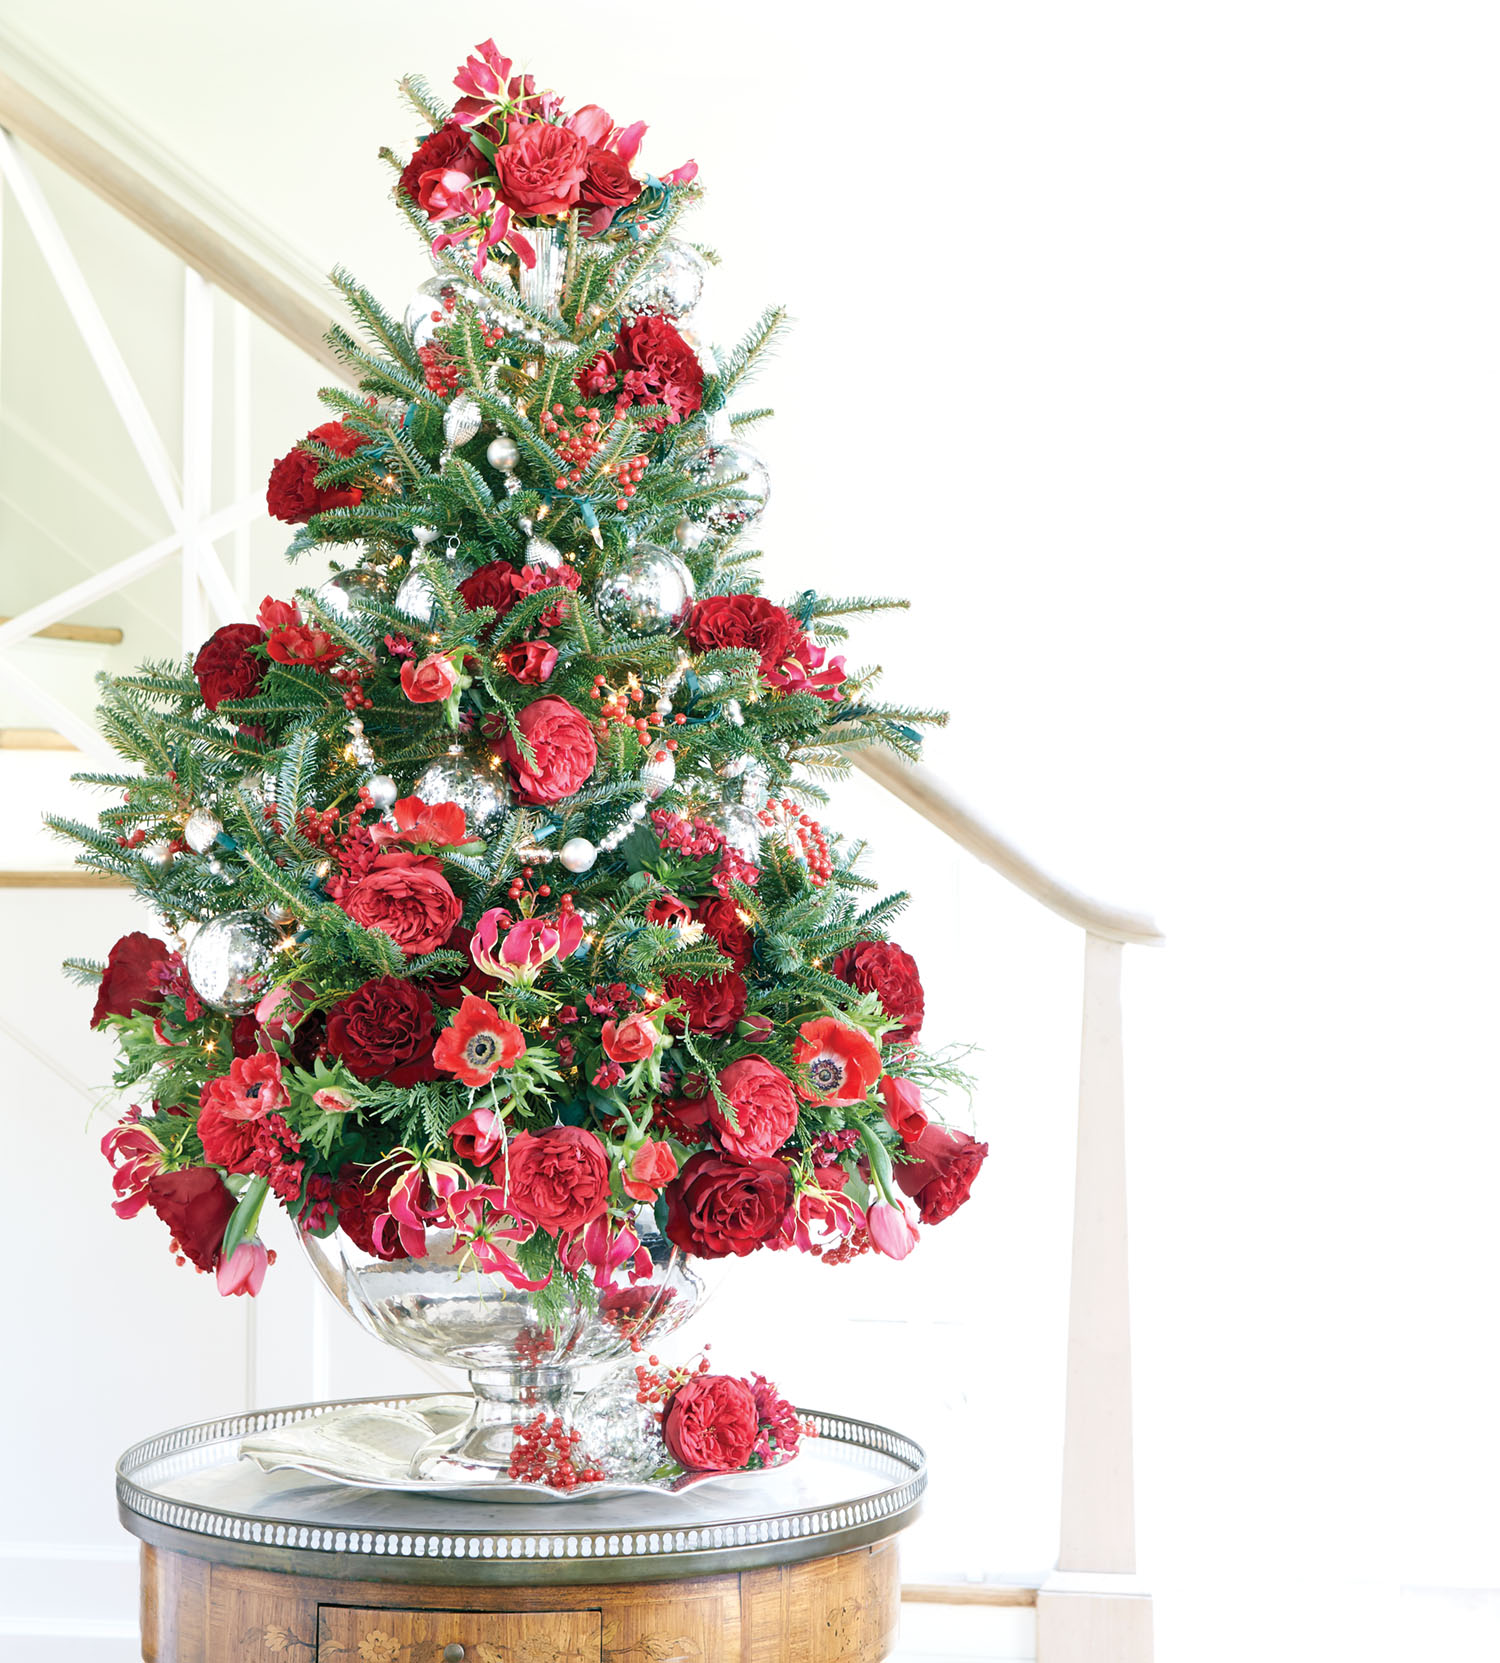 Ray Jordan's finished tabletop Christmas tree decorated with red flowers on an entry table